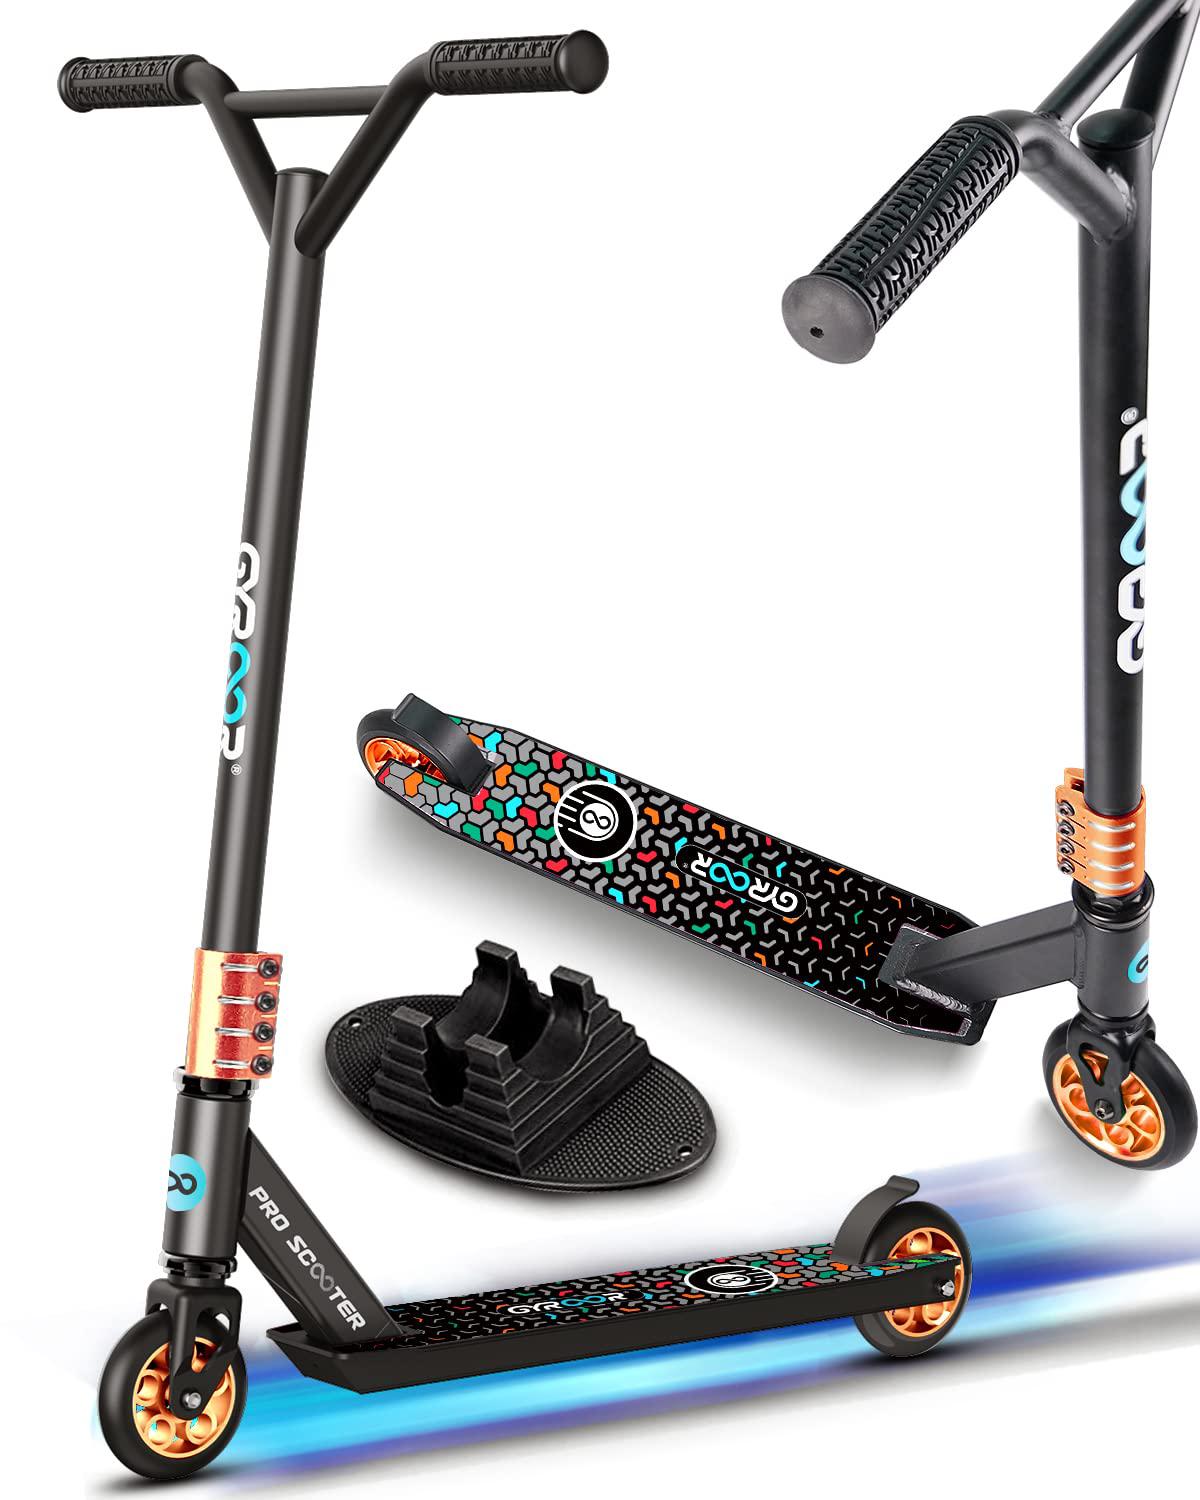 gyroor updated z1 pro scooter, trick scooters with 110mm wheels, up to 4 bolts for kids 8 years and up, stunt scooter for tri